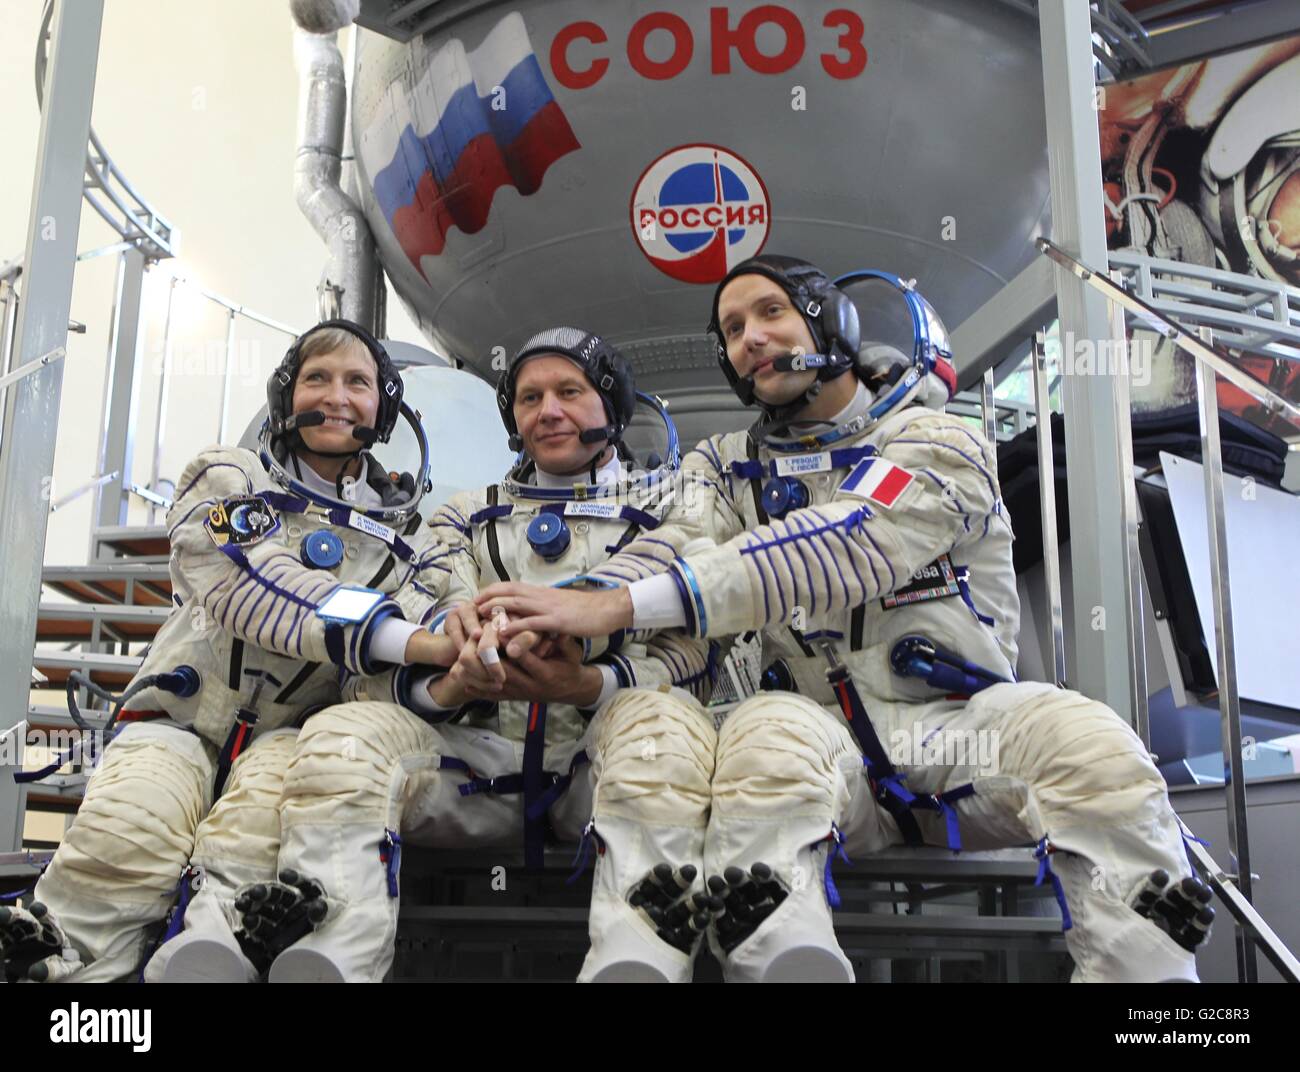 International Space Station Expedition 48 backup crew pose for photos at the Soyuz simulator in launch suits at the Gagarin Cosmonaut Training Center May 26, 2016 in Star City. Russia, Crewmembers from L-R are: NASA astronaut Peggy Whitson, Russian cosmonaut Oleg Novitskiy and French astronaut Thomas Pesquet. Stock Photo